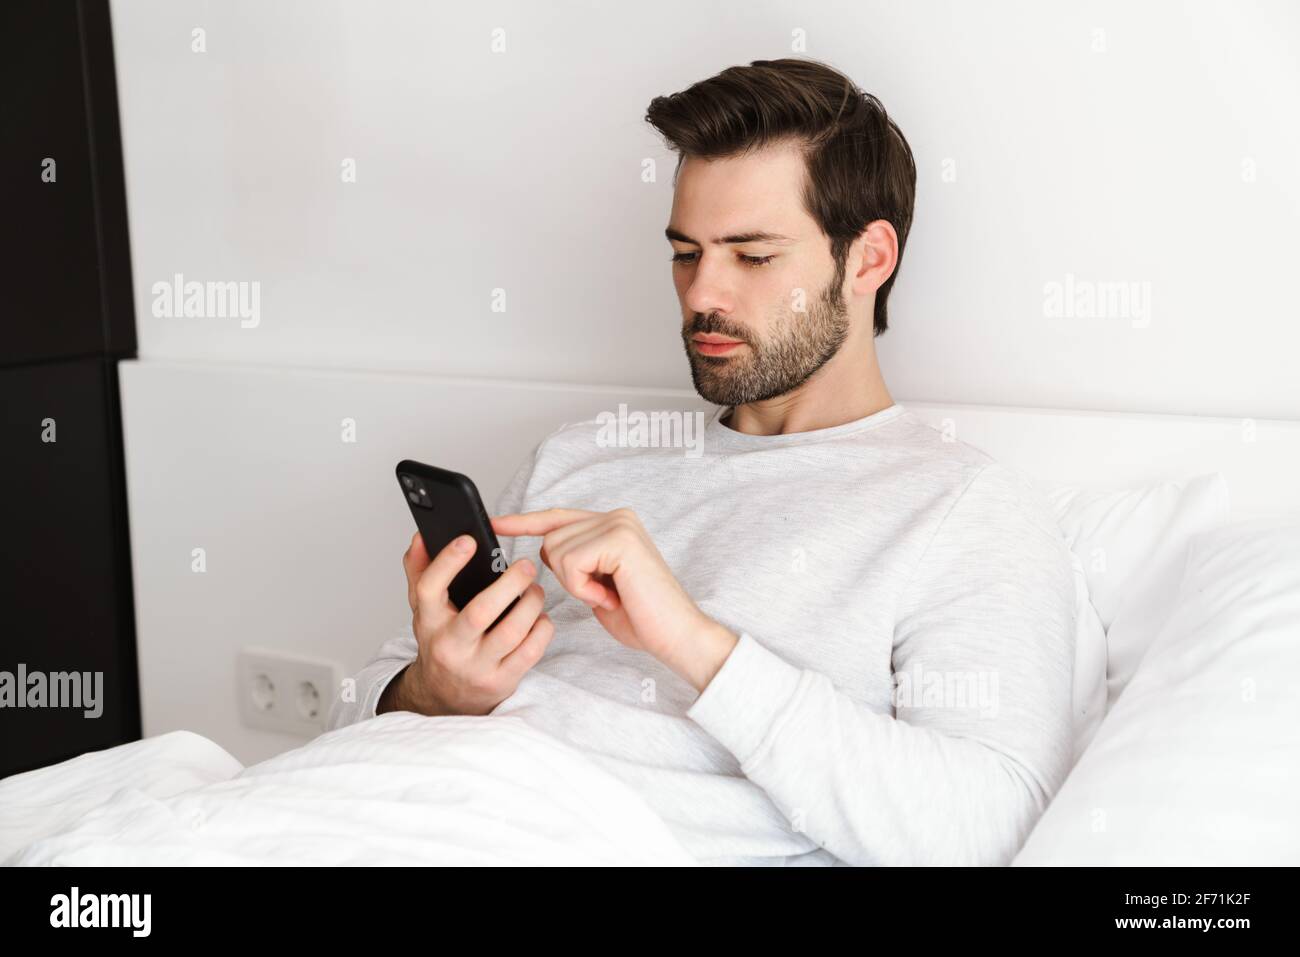 Focused handsome man using mobile phone while resting in bed at home Stock Photo